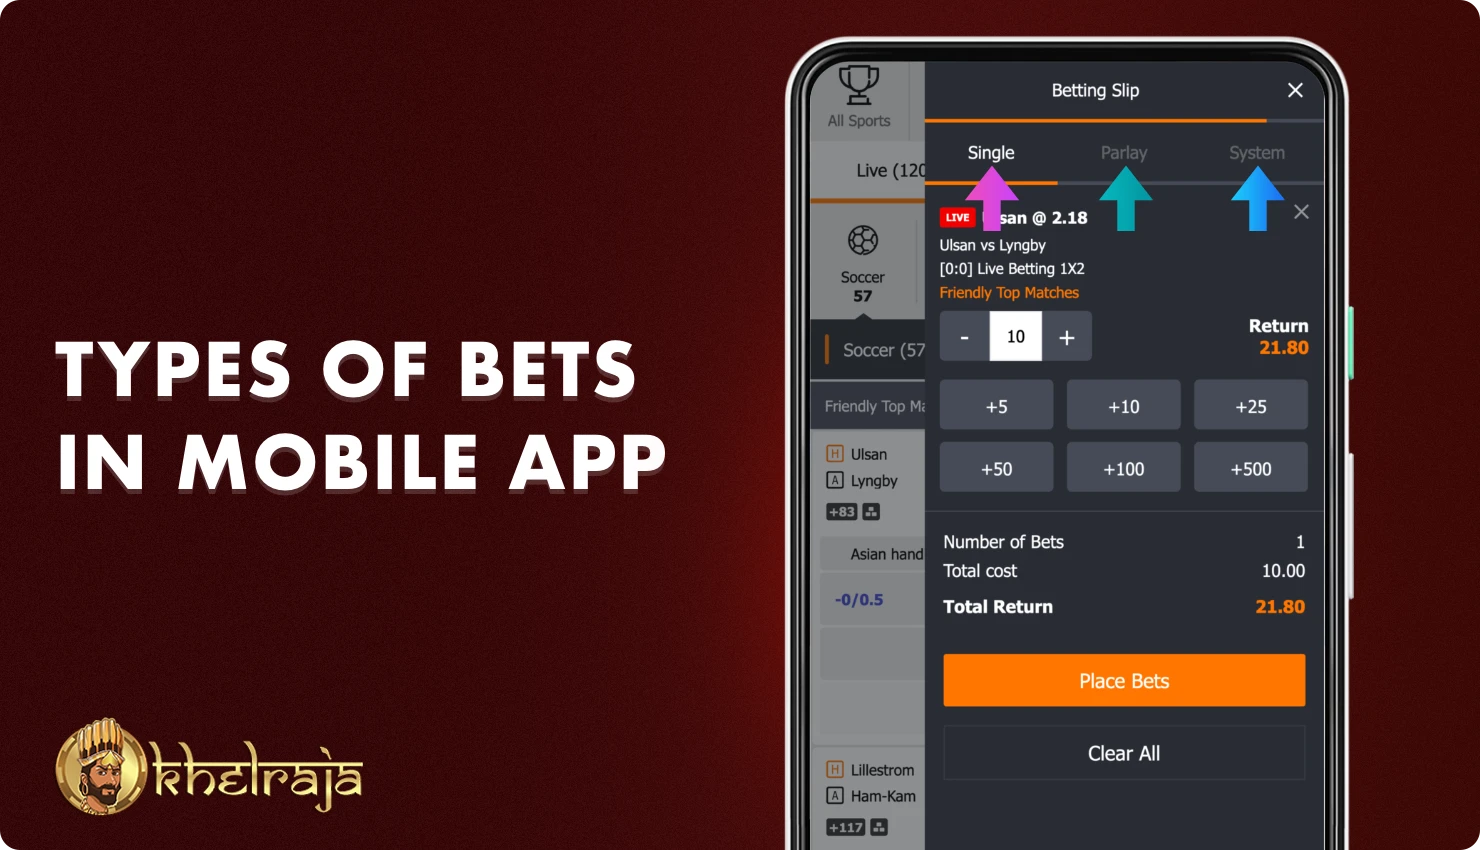 The Khelraja mobile app offers users various types of sports betting